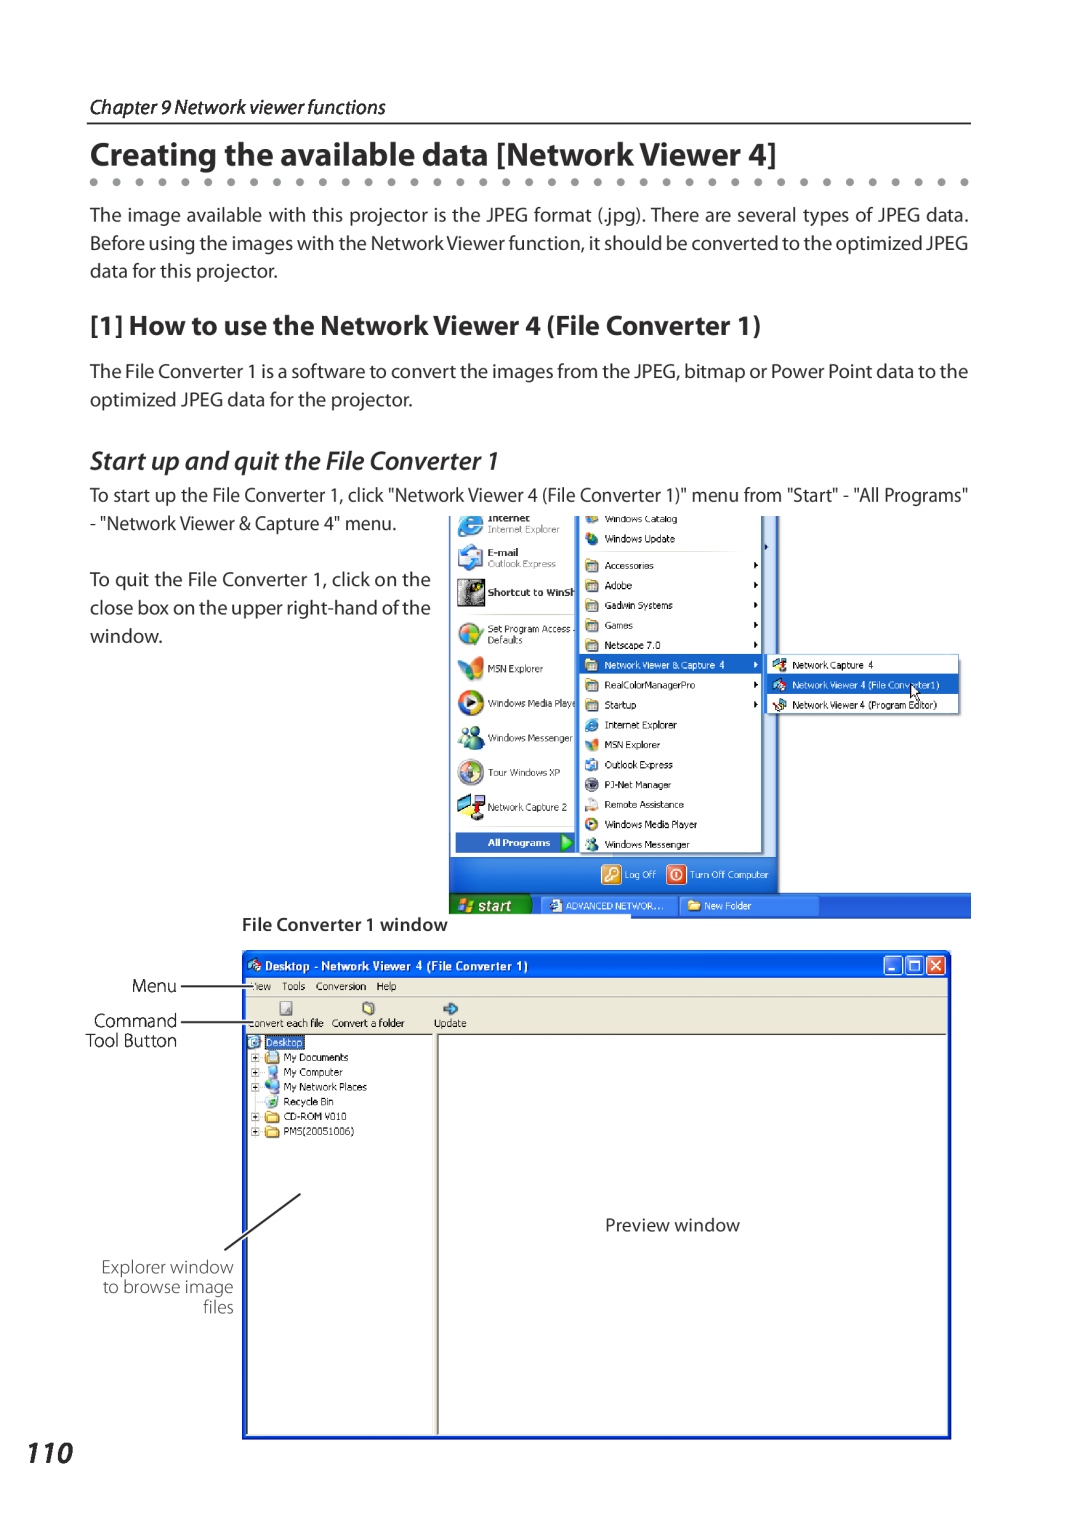 Eiki QXXAVC922---P owner manual Creating the available data Network Viewer, How to use the Network Viewer 4 File Converter 